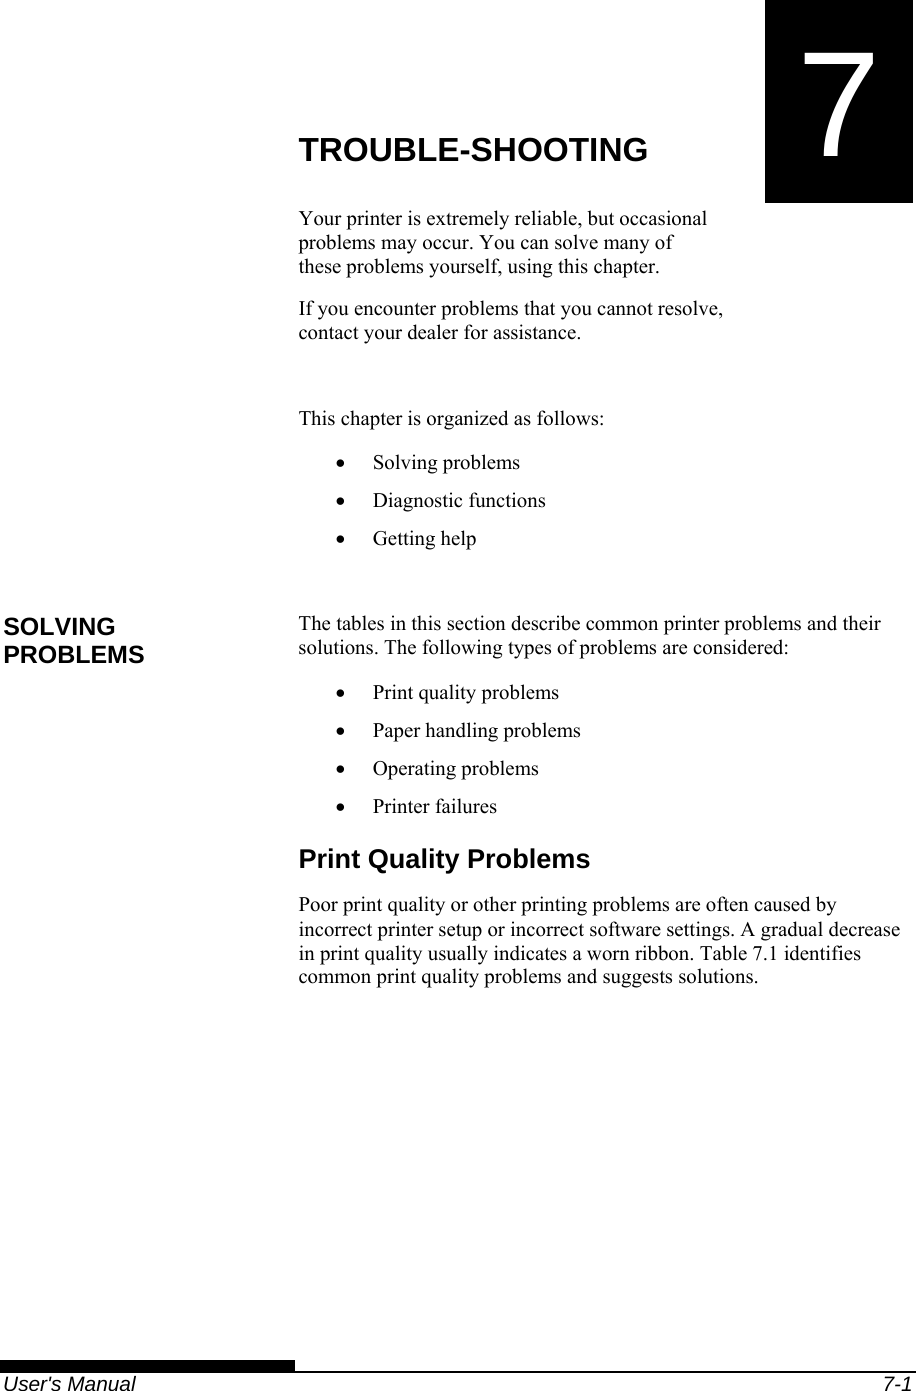   User&apos;s Manual  7-1 7  CHAPTER 7  TROUBLE-SHOOTING TROUBLE-SHOOTING Your printer is extremely reliable, but occasional problems may occur. You can solve many of these problems yourself, using this chapter. If you encounter problems that you cannot resolve, contact your dealer for assistance.  This chapter is organized as follows: • Solving problems • Diagnostic functions • Getting help  The tables in this section describe common printer problems and their solutions. The following types of problems are considered: • Print quality problems • Paper handling problems • Operating problems • Printer failures Print Quality Problems Poor print quality or other printing problems are often caused by incorrect printer setup or incorrect software settings. A gradual decrease in print quality usually indicates a worn ribbon. Table 7.1 identifies common print quality problems and suggests solutions.  SOLVING PROBLEMS 